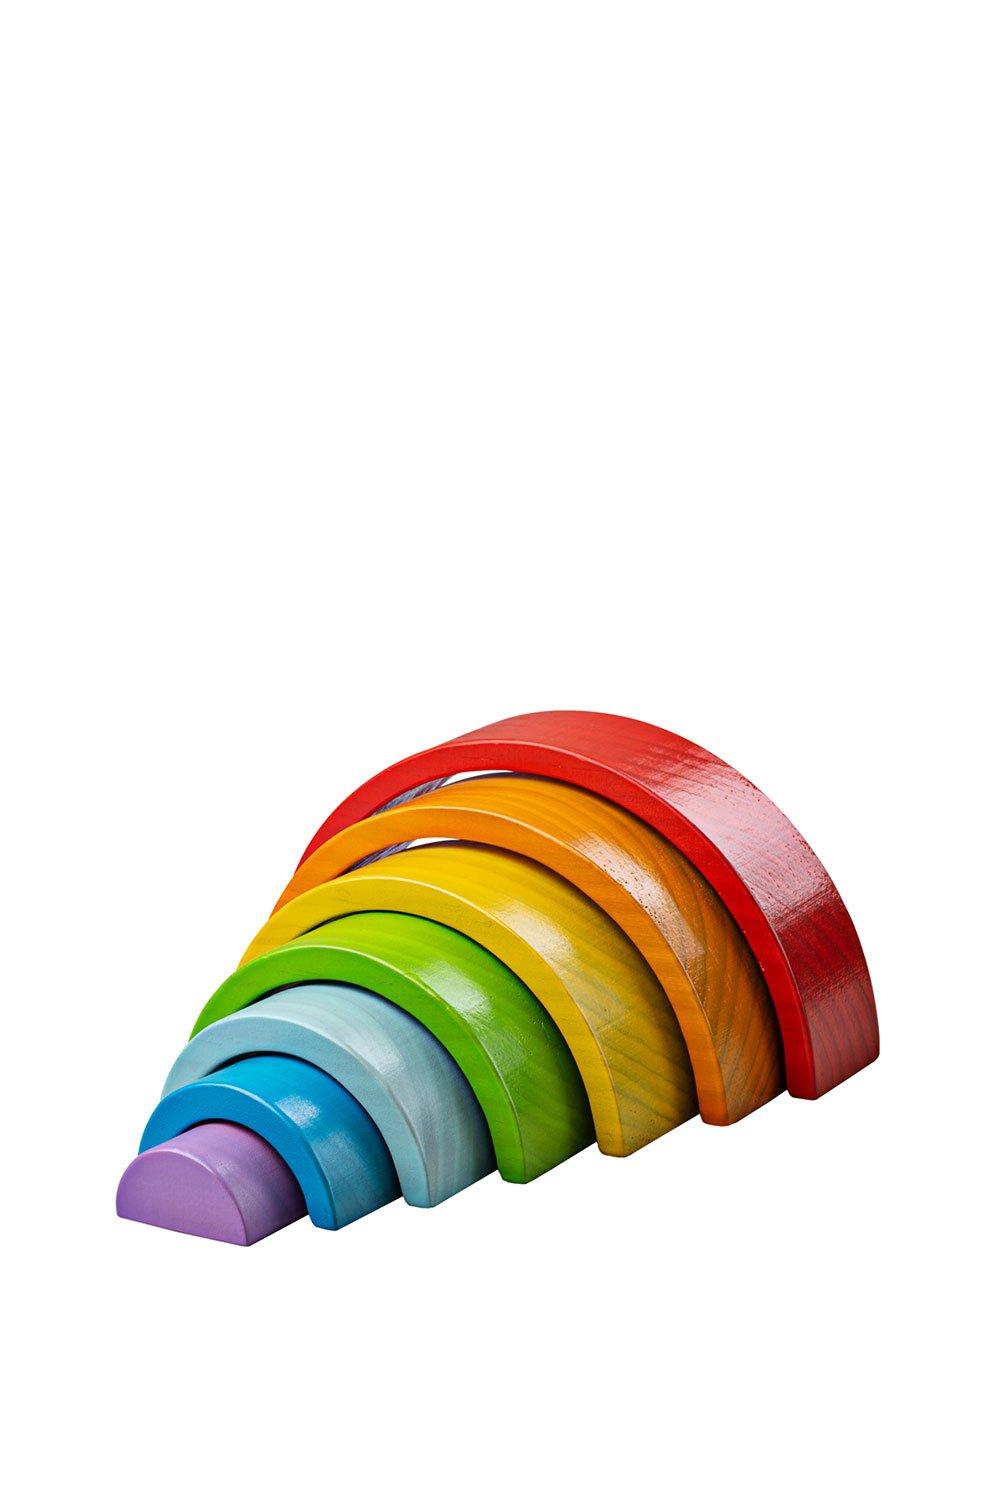 Bigjigs Toys Small Stacking Rainbow Toy